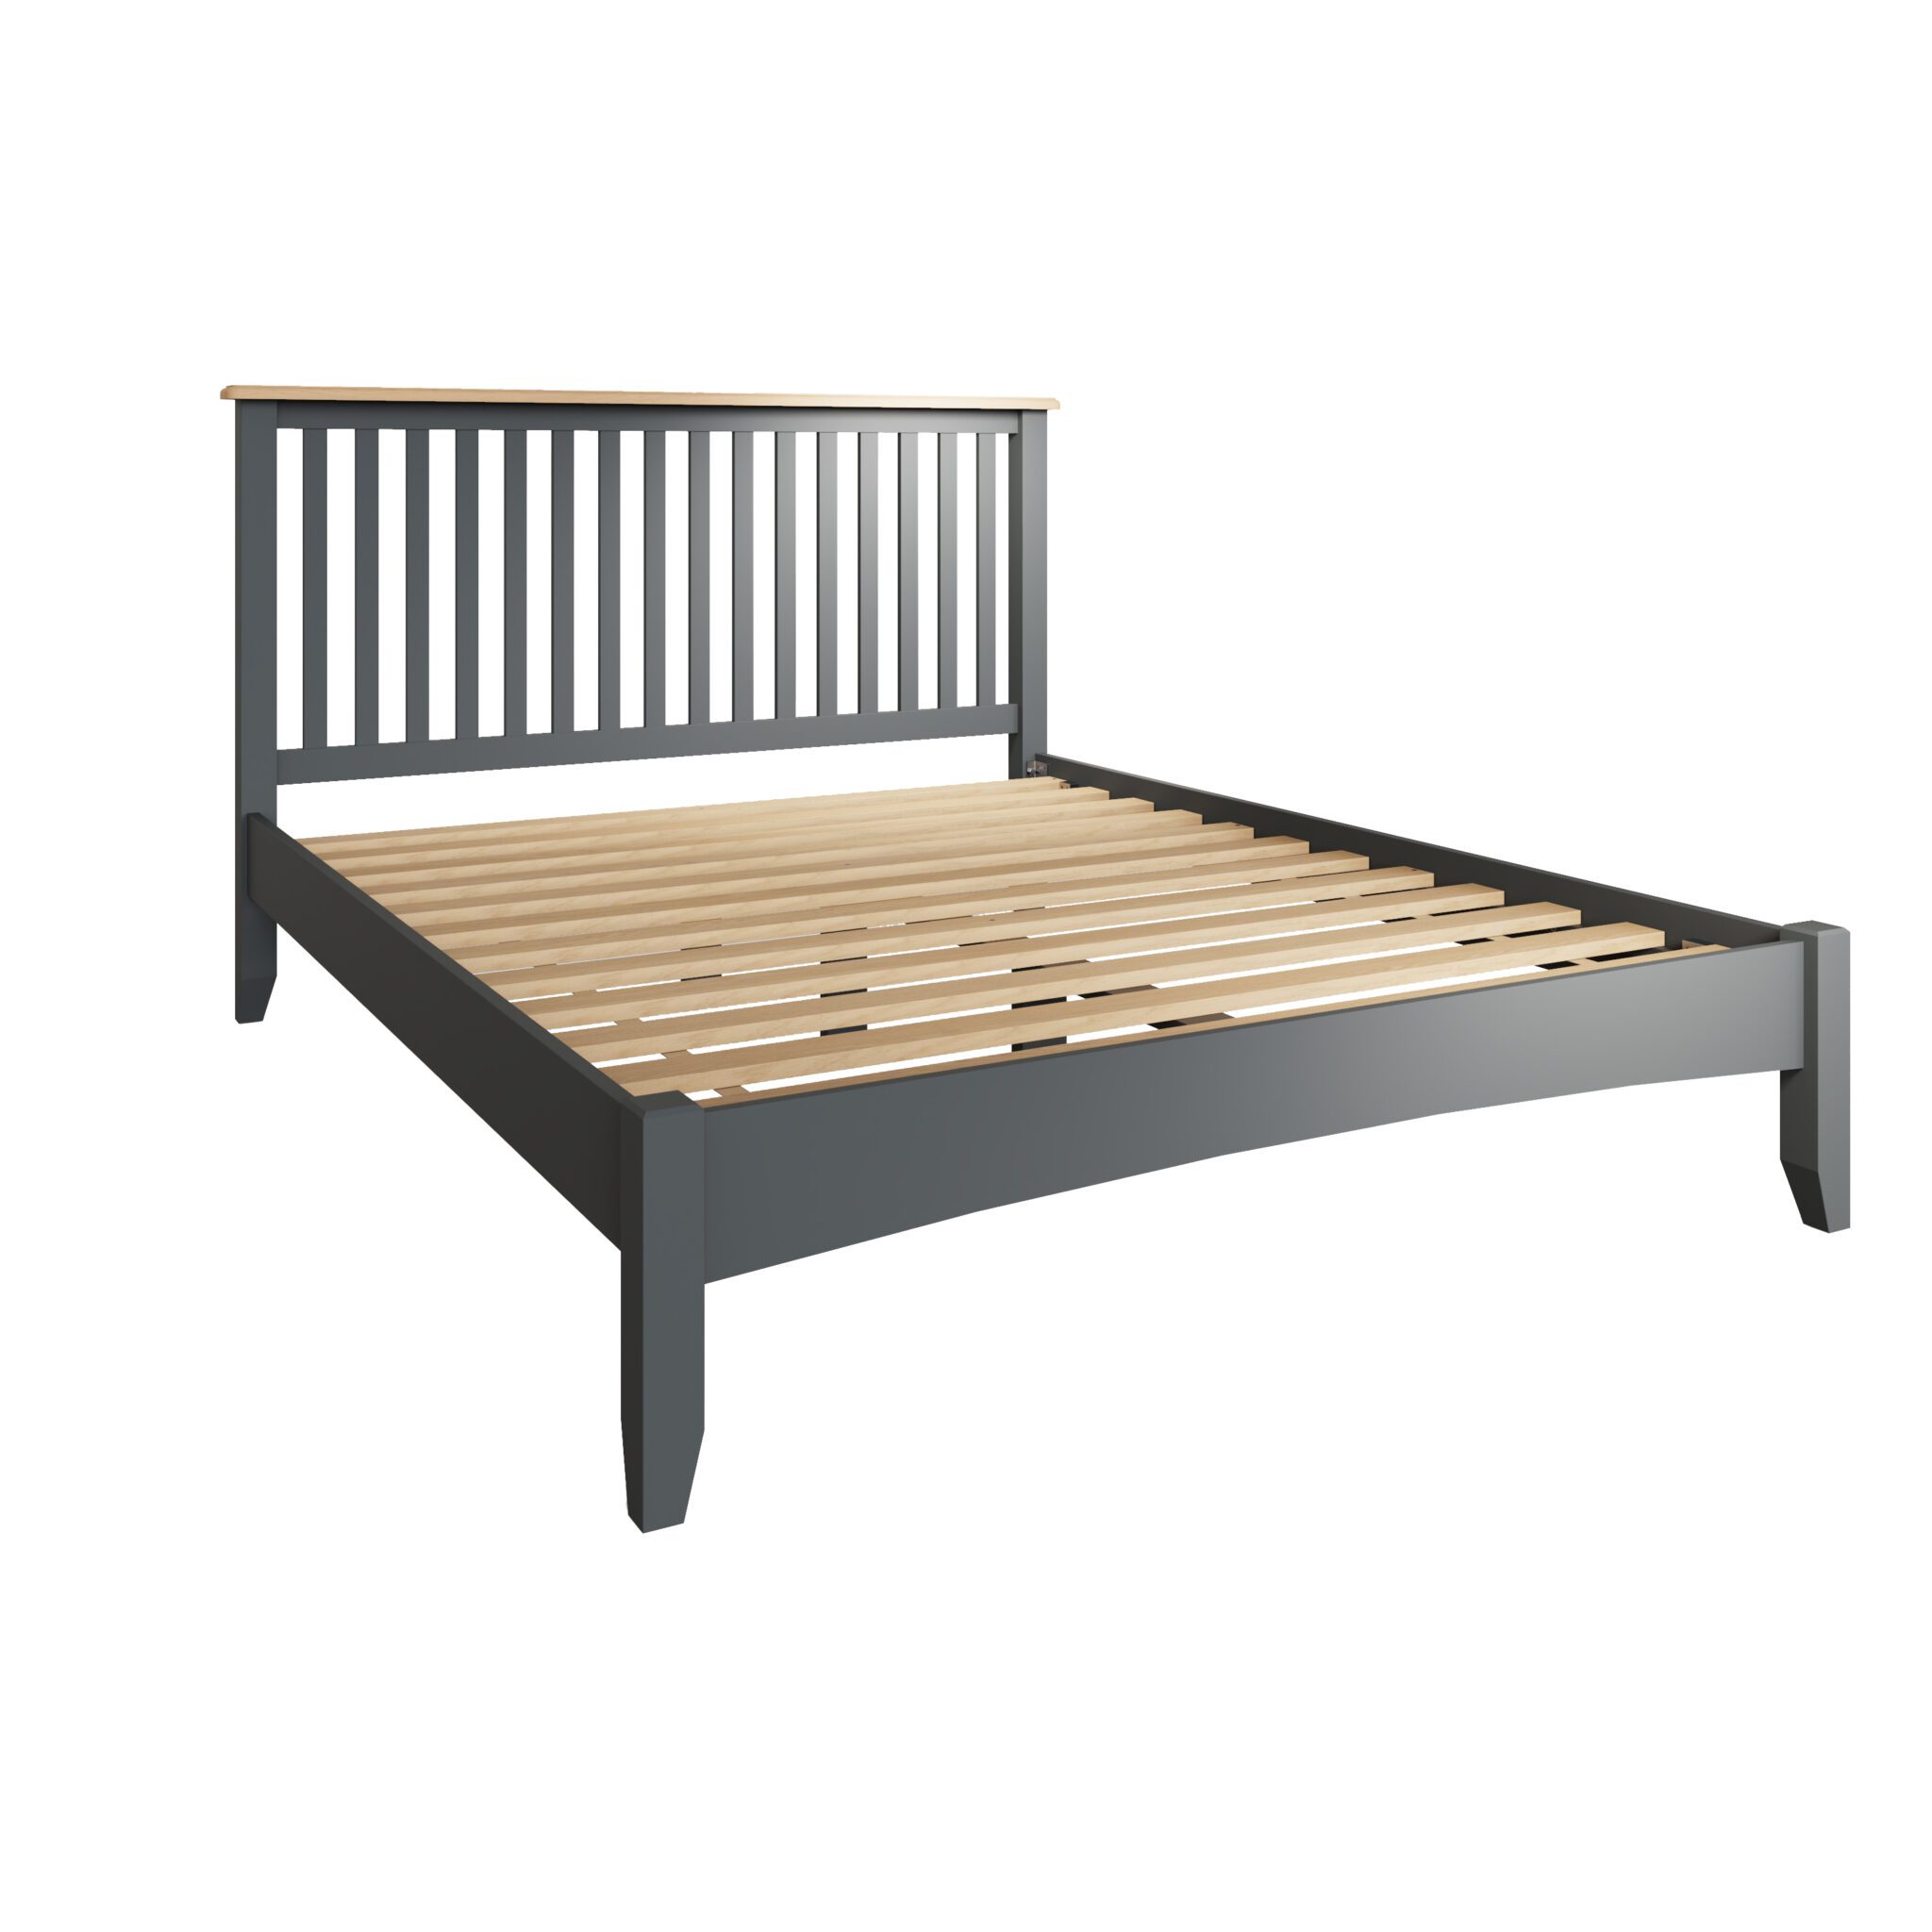 Gala 5ft Bed Frame (Grey Painted)